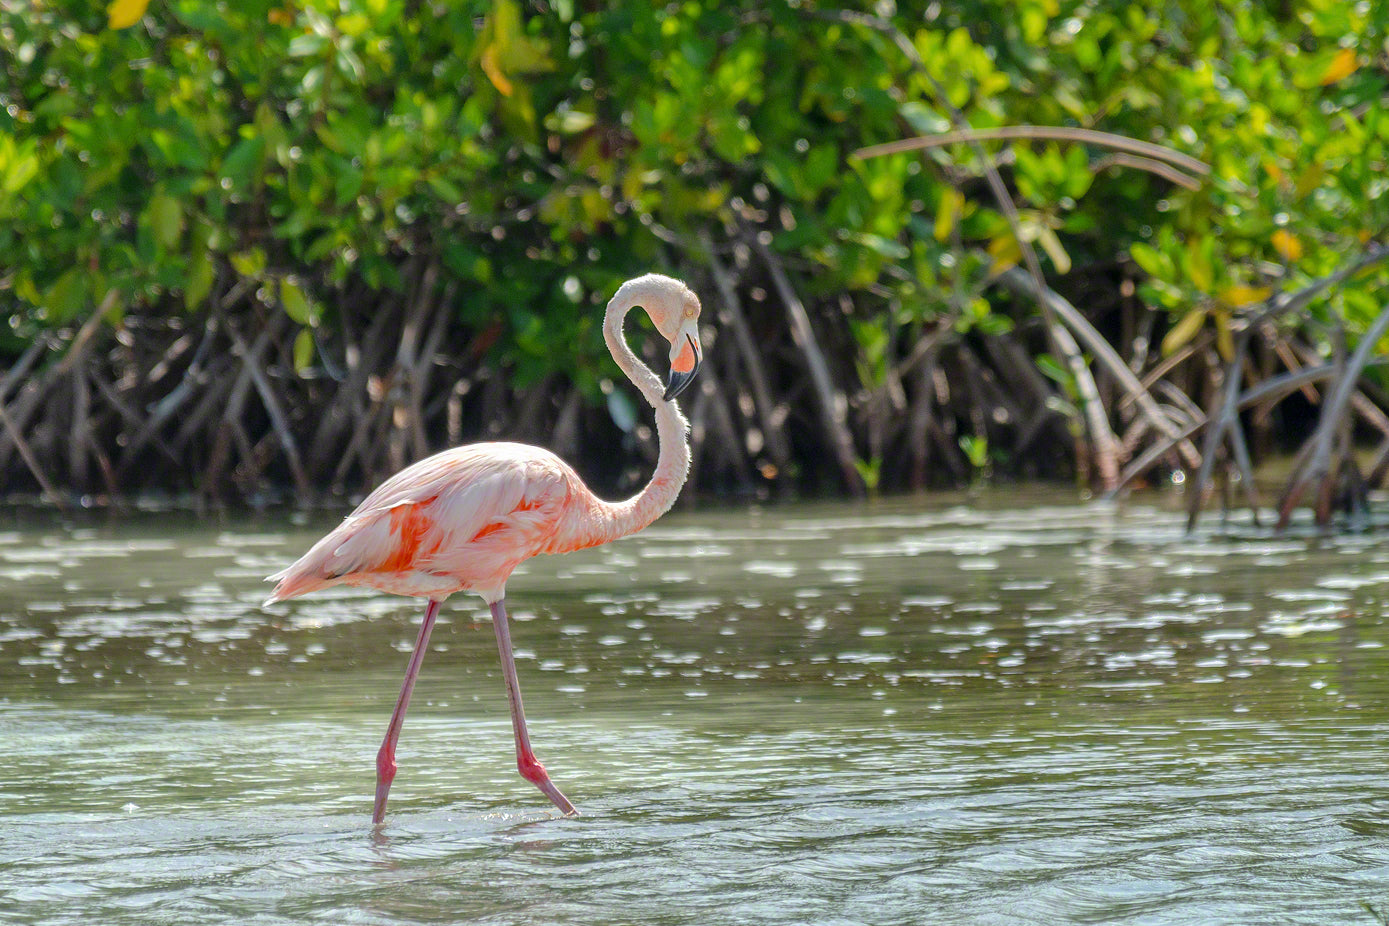 A photo of a beautiful Flamingo along the mangroves in Bonaire